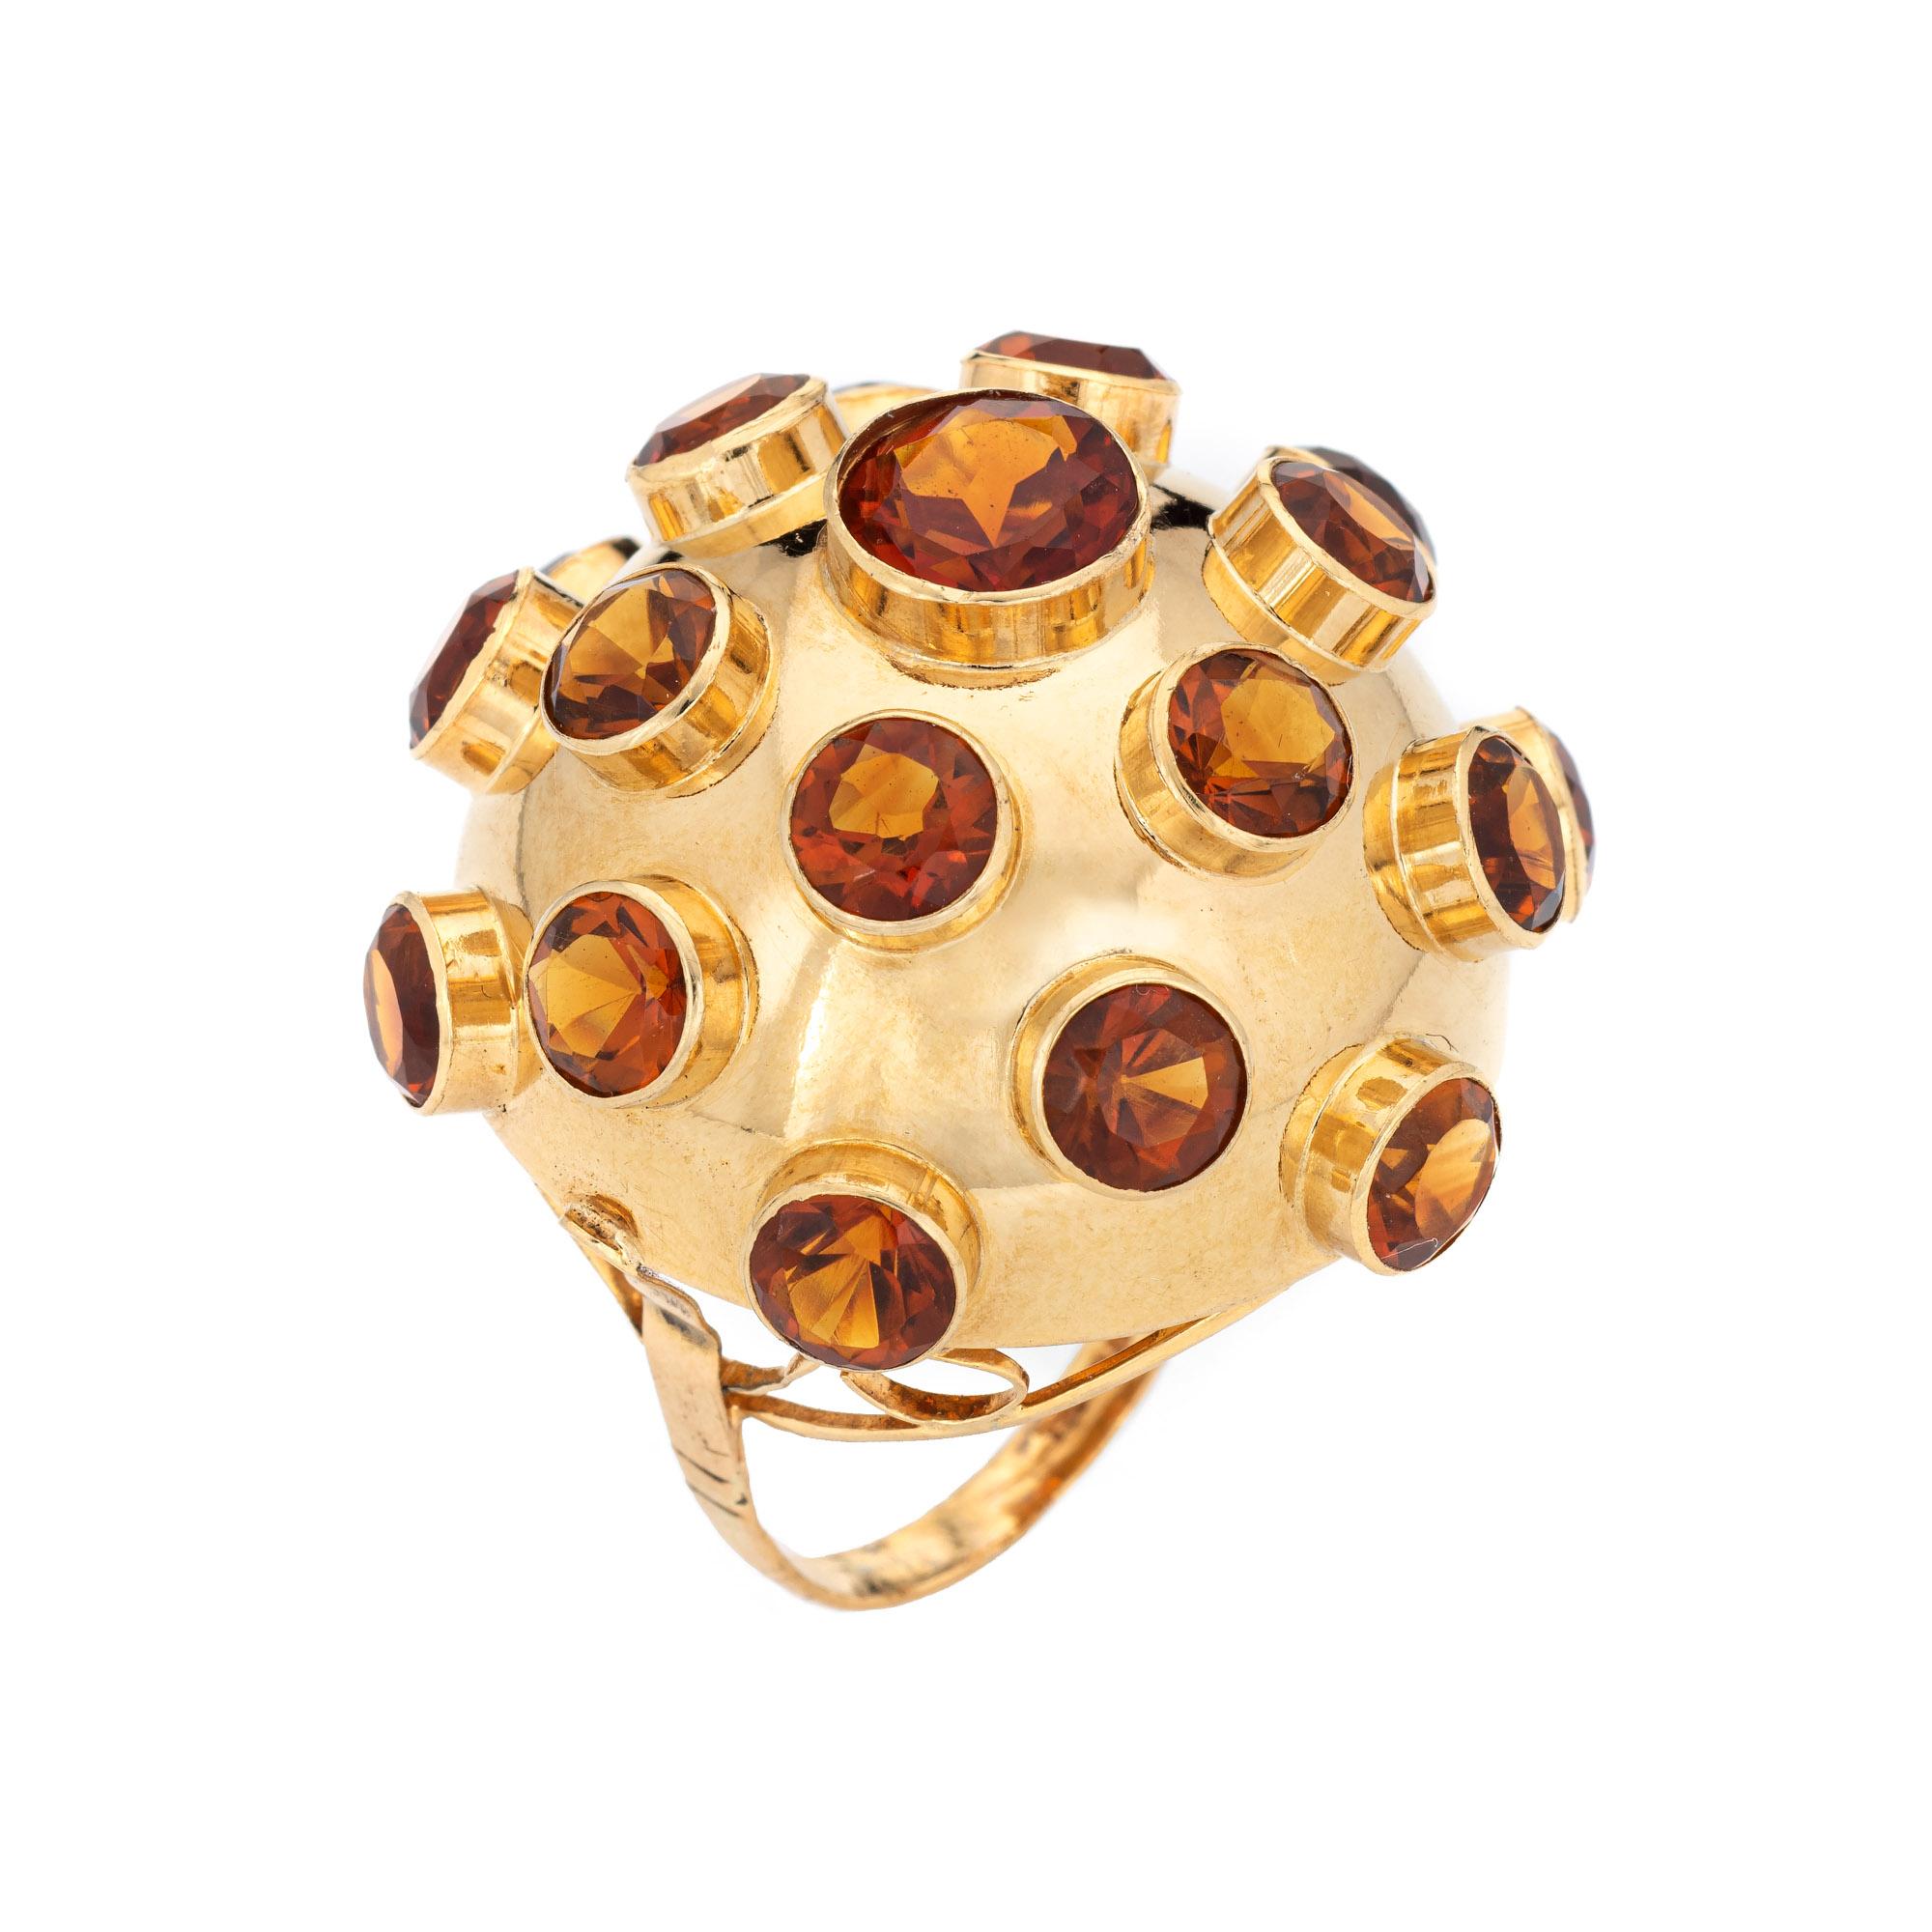 Ornate sputnik domed gemstone cocktail ring (circa 1950s to 1960s) crafted in 18 karat yellow gold. 

Citrines measure from 5mm to 8.5mm and total an estimated 12 carats. The gemstones are in very good condition and free of cracks or chips.

The